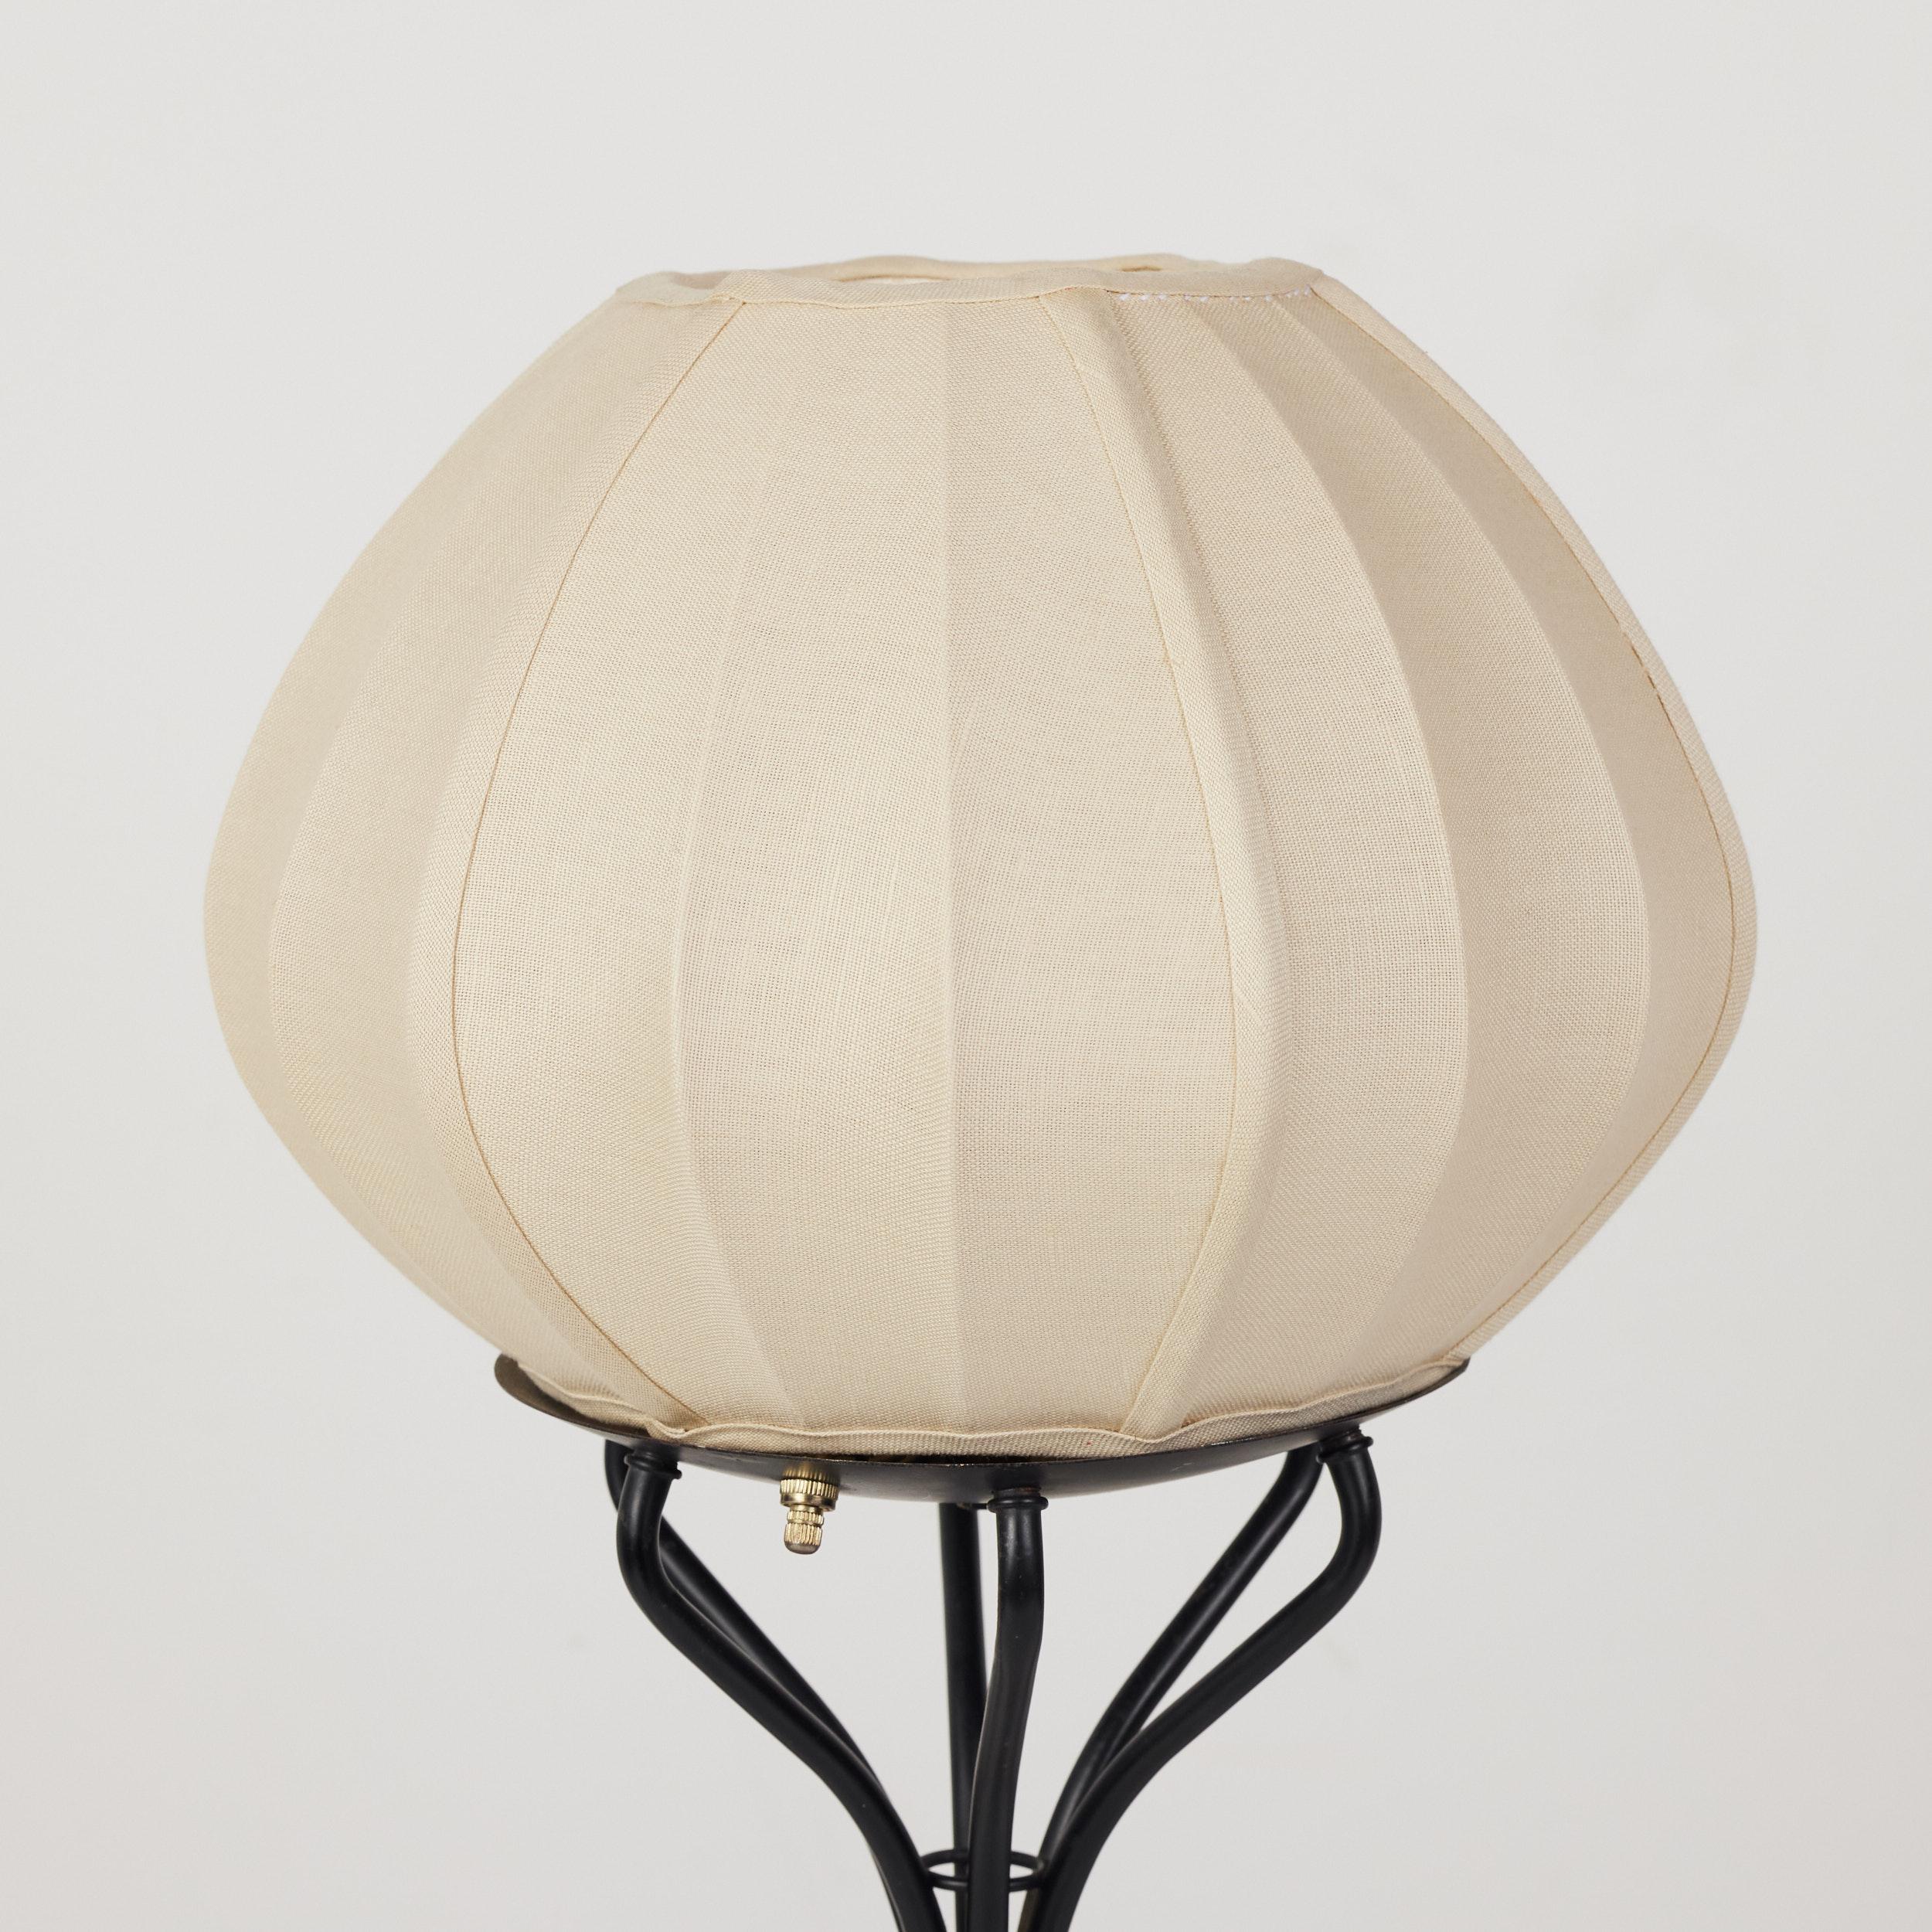 Six Legged Cocoon Table Lamp with Linen Shade 2